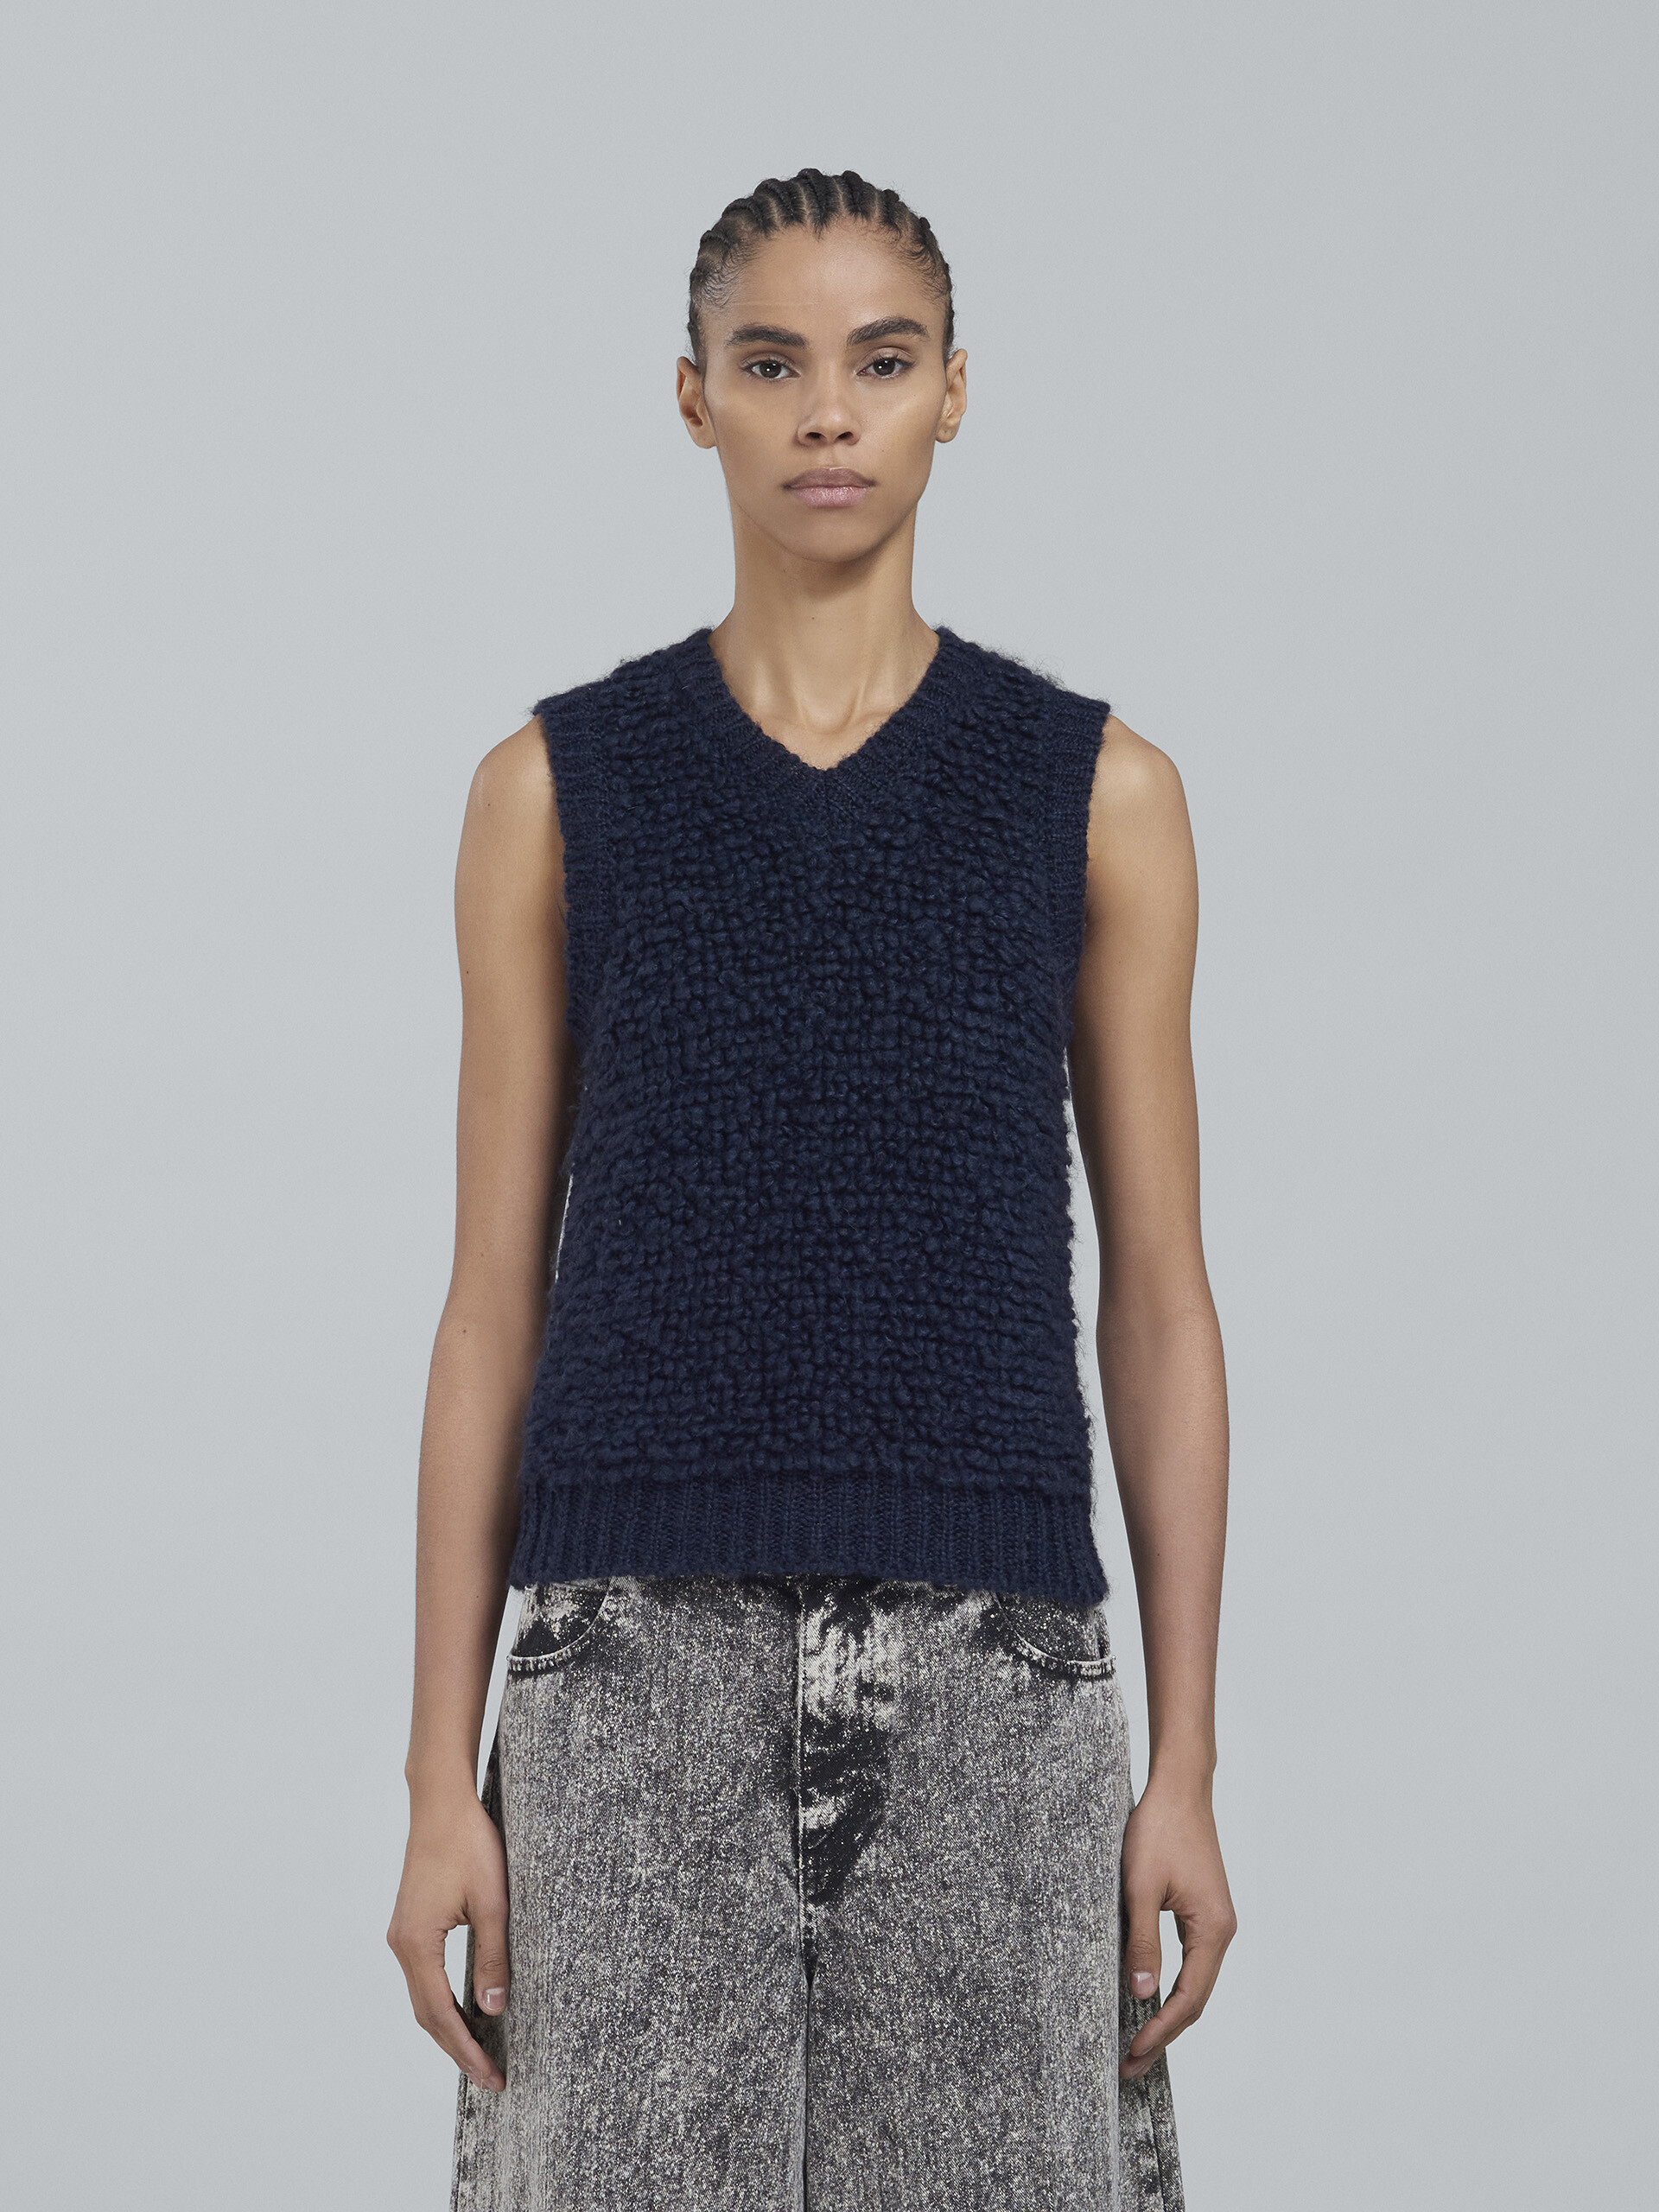 Mohair vest - Pullovers - Image 2